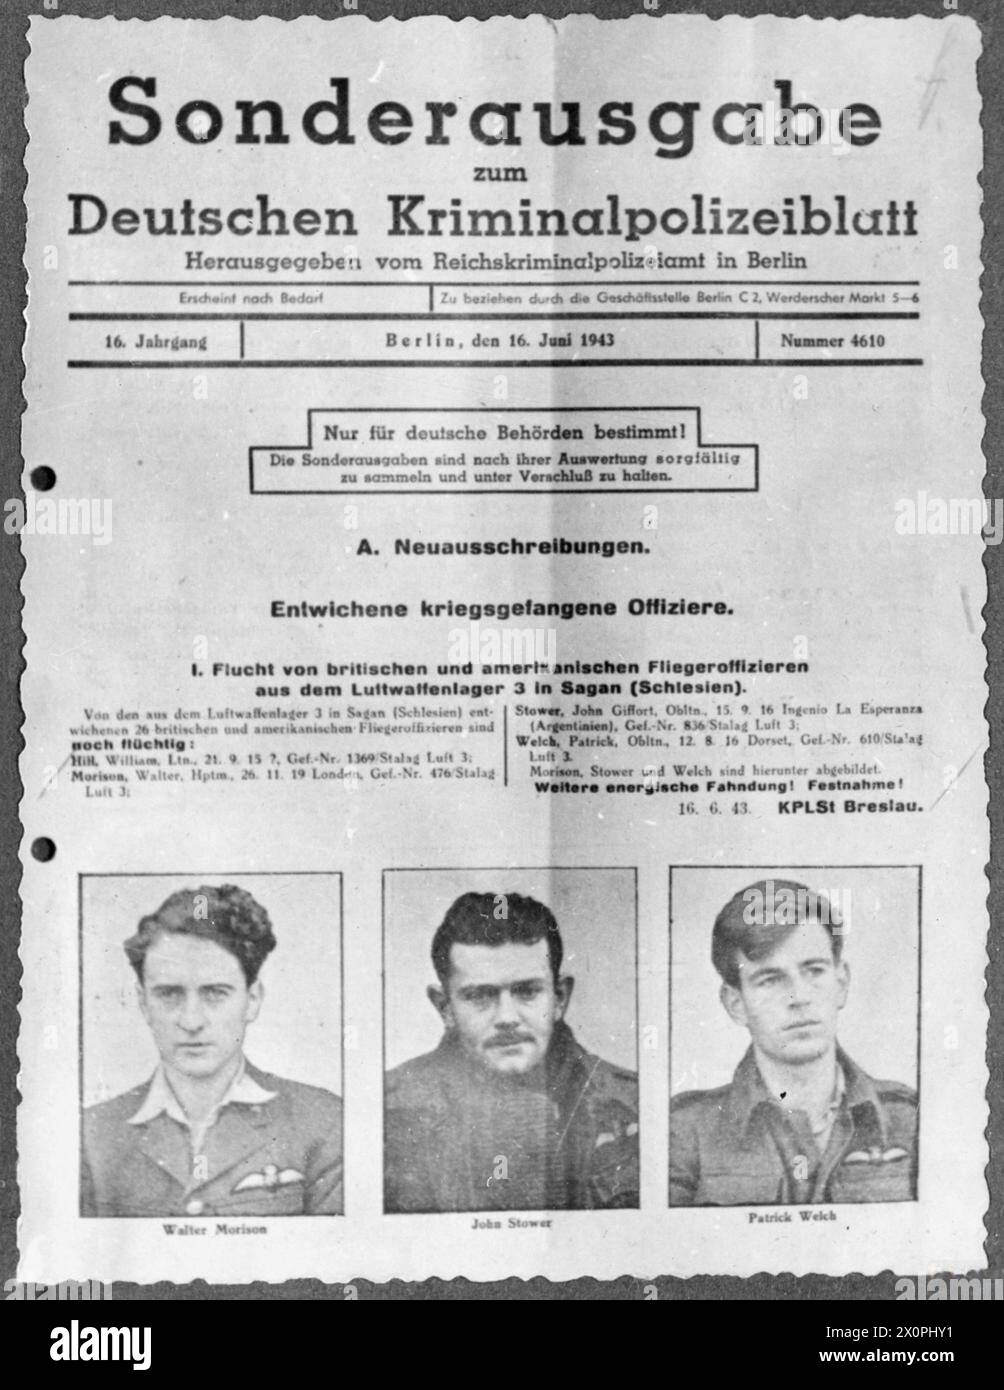 ALLIED PRISONERS OF WAR IN GERMANY, 1939-1945 - A wanted poster issued by the Germans for three RAF officers, Patrick Lorne Welch, Flying Officer John Gifford Stower and Flight Lieutenant Walter Morrison, who tried to escape from Stalag Luft III, Sagan (during so called delousing break) on 12 June 1943. Flying Officer Stower was murdered by the Gestapo on 31 March 1944 after being recaptured after failure of the Great Escape Royal Air Force, Morrison, Walter McDonald, Stower, John Gifford 'Johnny', Welch, Patrick Palles Lorne Elphinstone Stock Photo